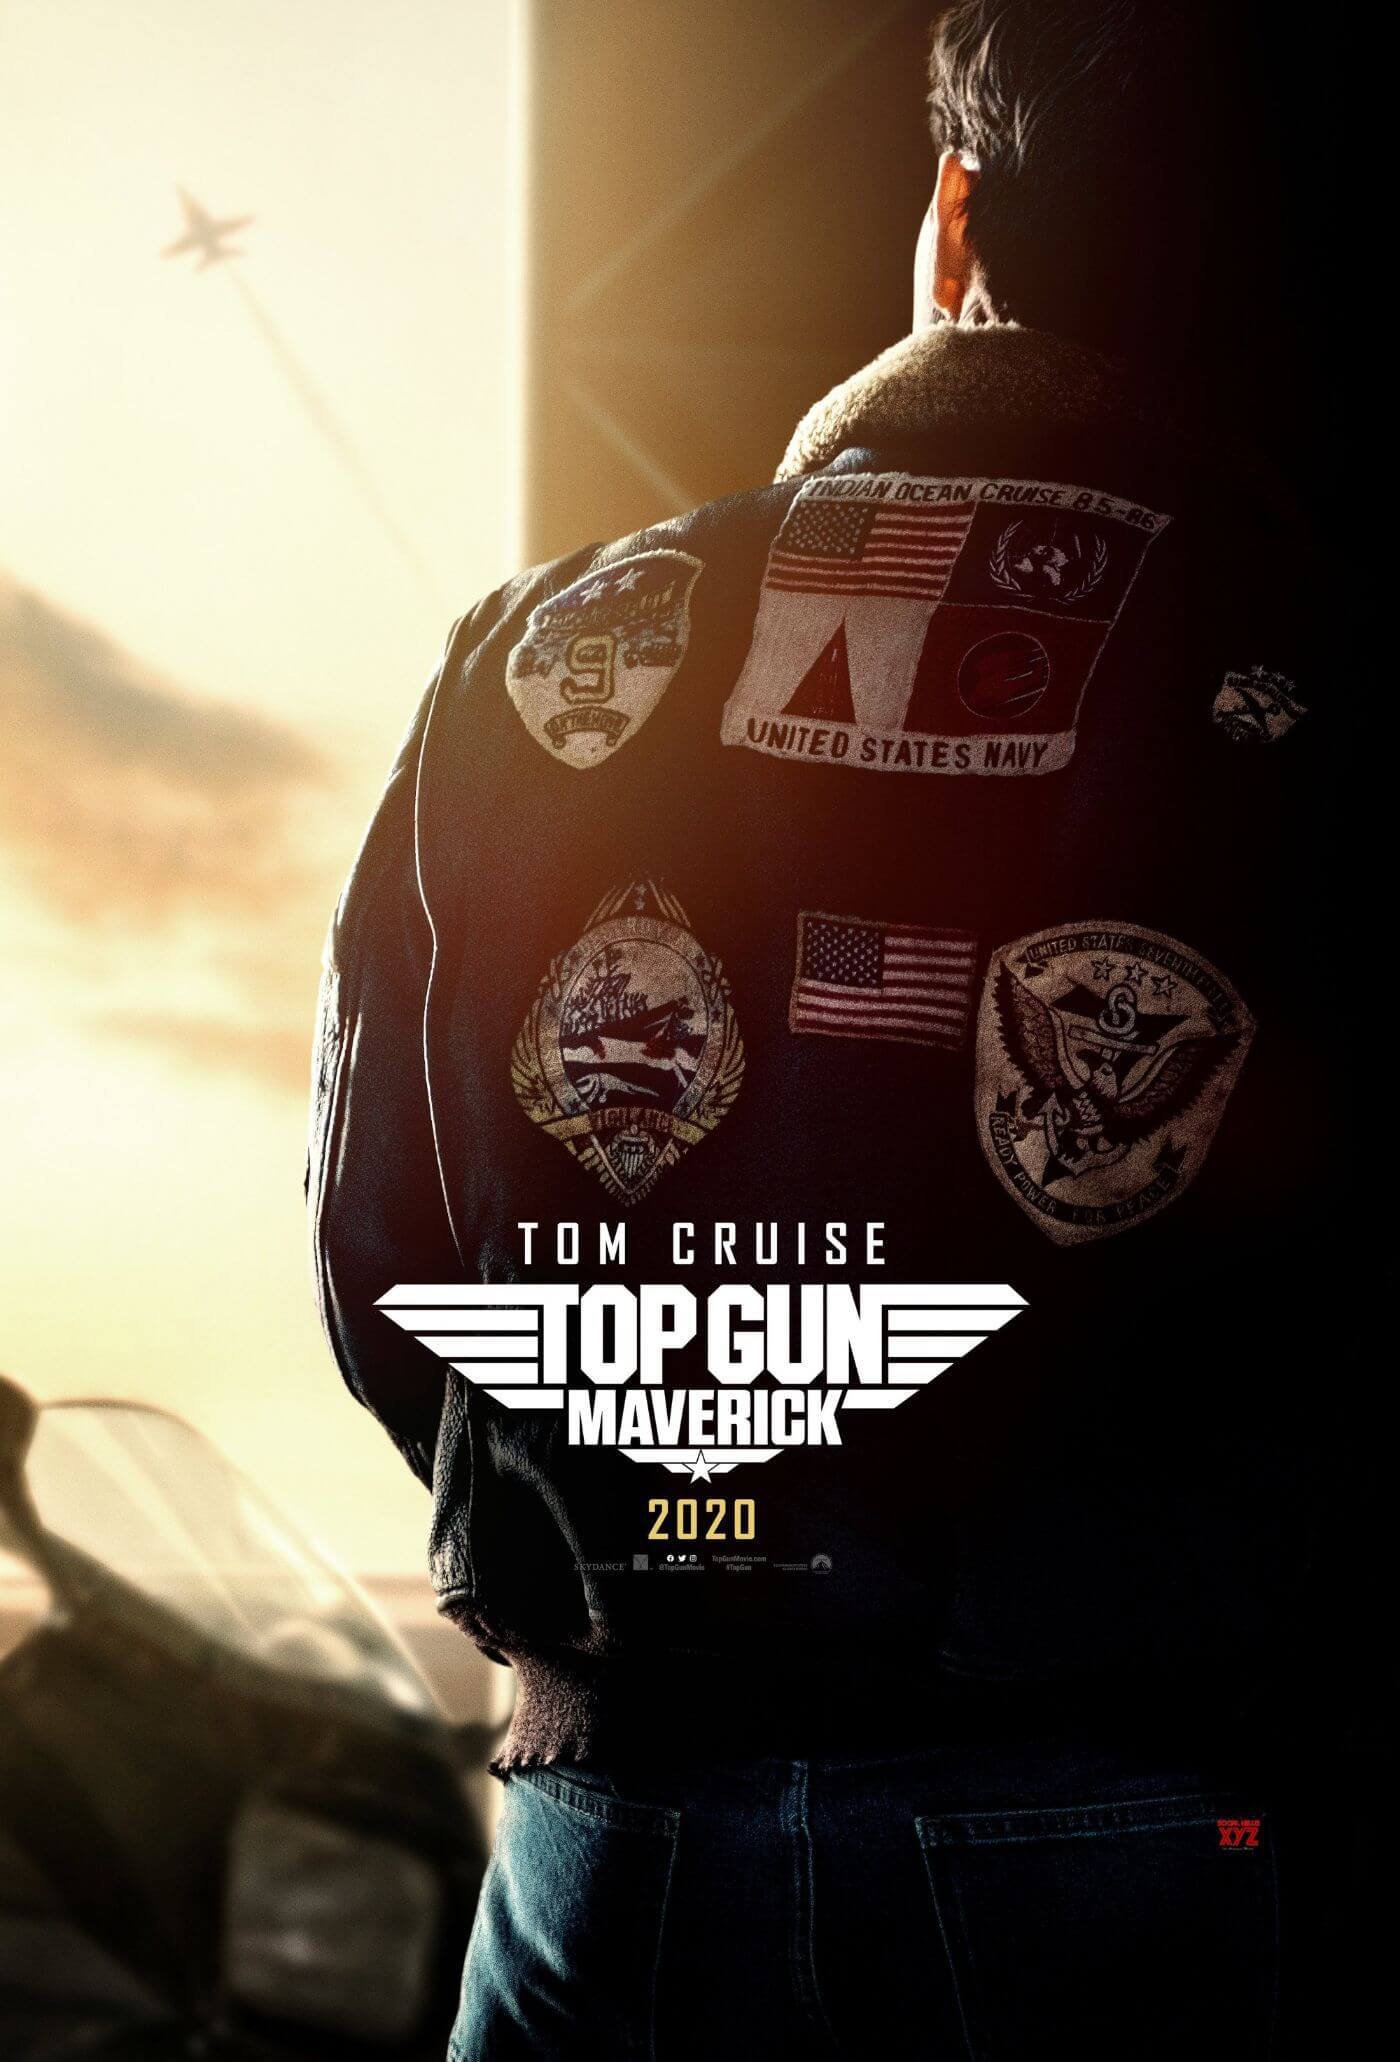 Top Gun Maverick Cruise Action Movie Poster Size Posters by Kaiden Thompson. Buy Posters, Frames, Canvas & Digital Art Prints. Small, Compact, Medium and Large Variants